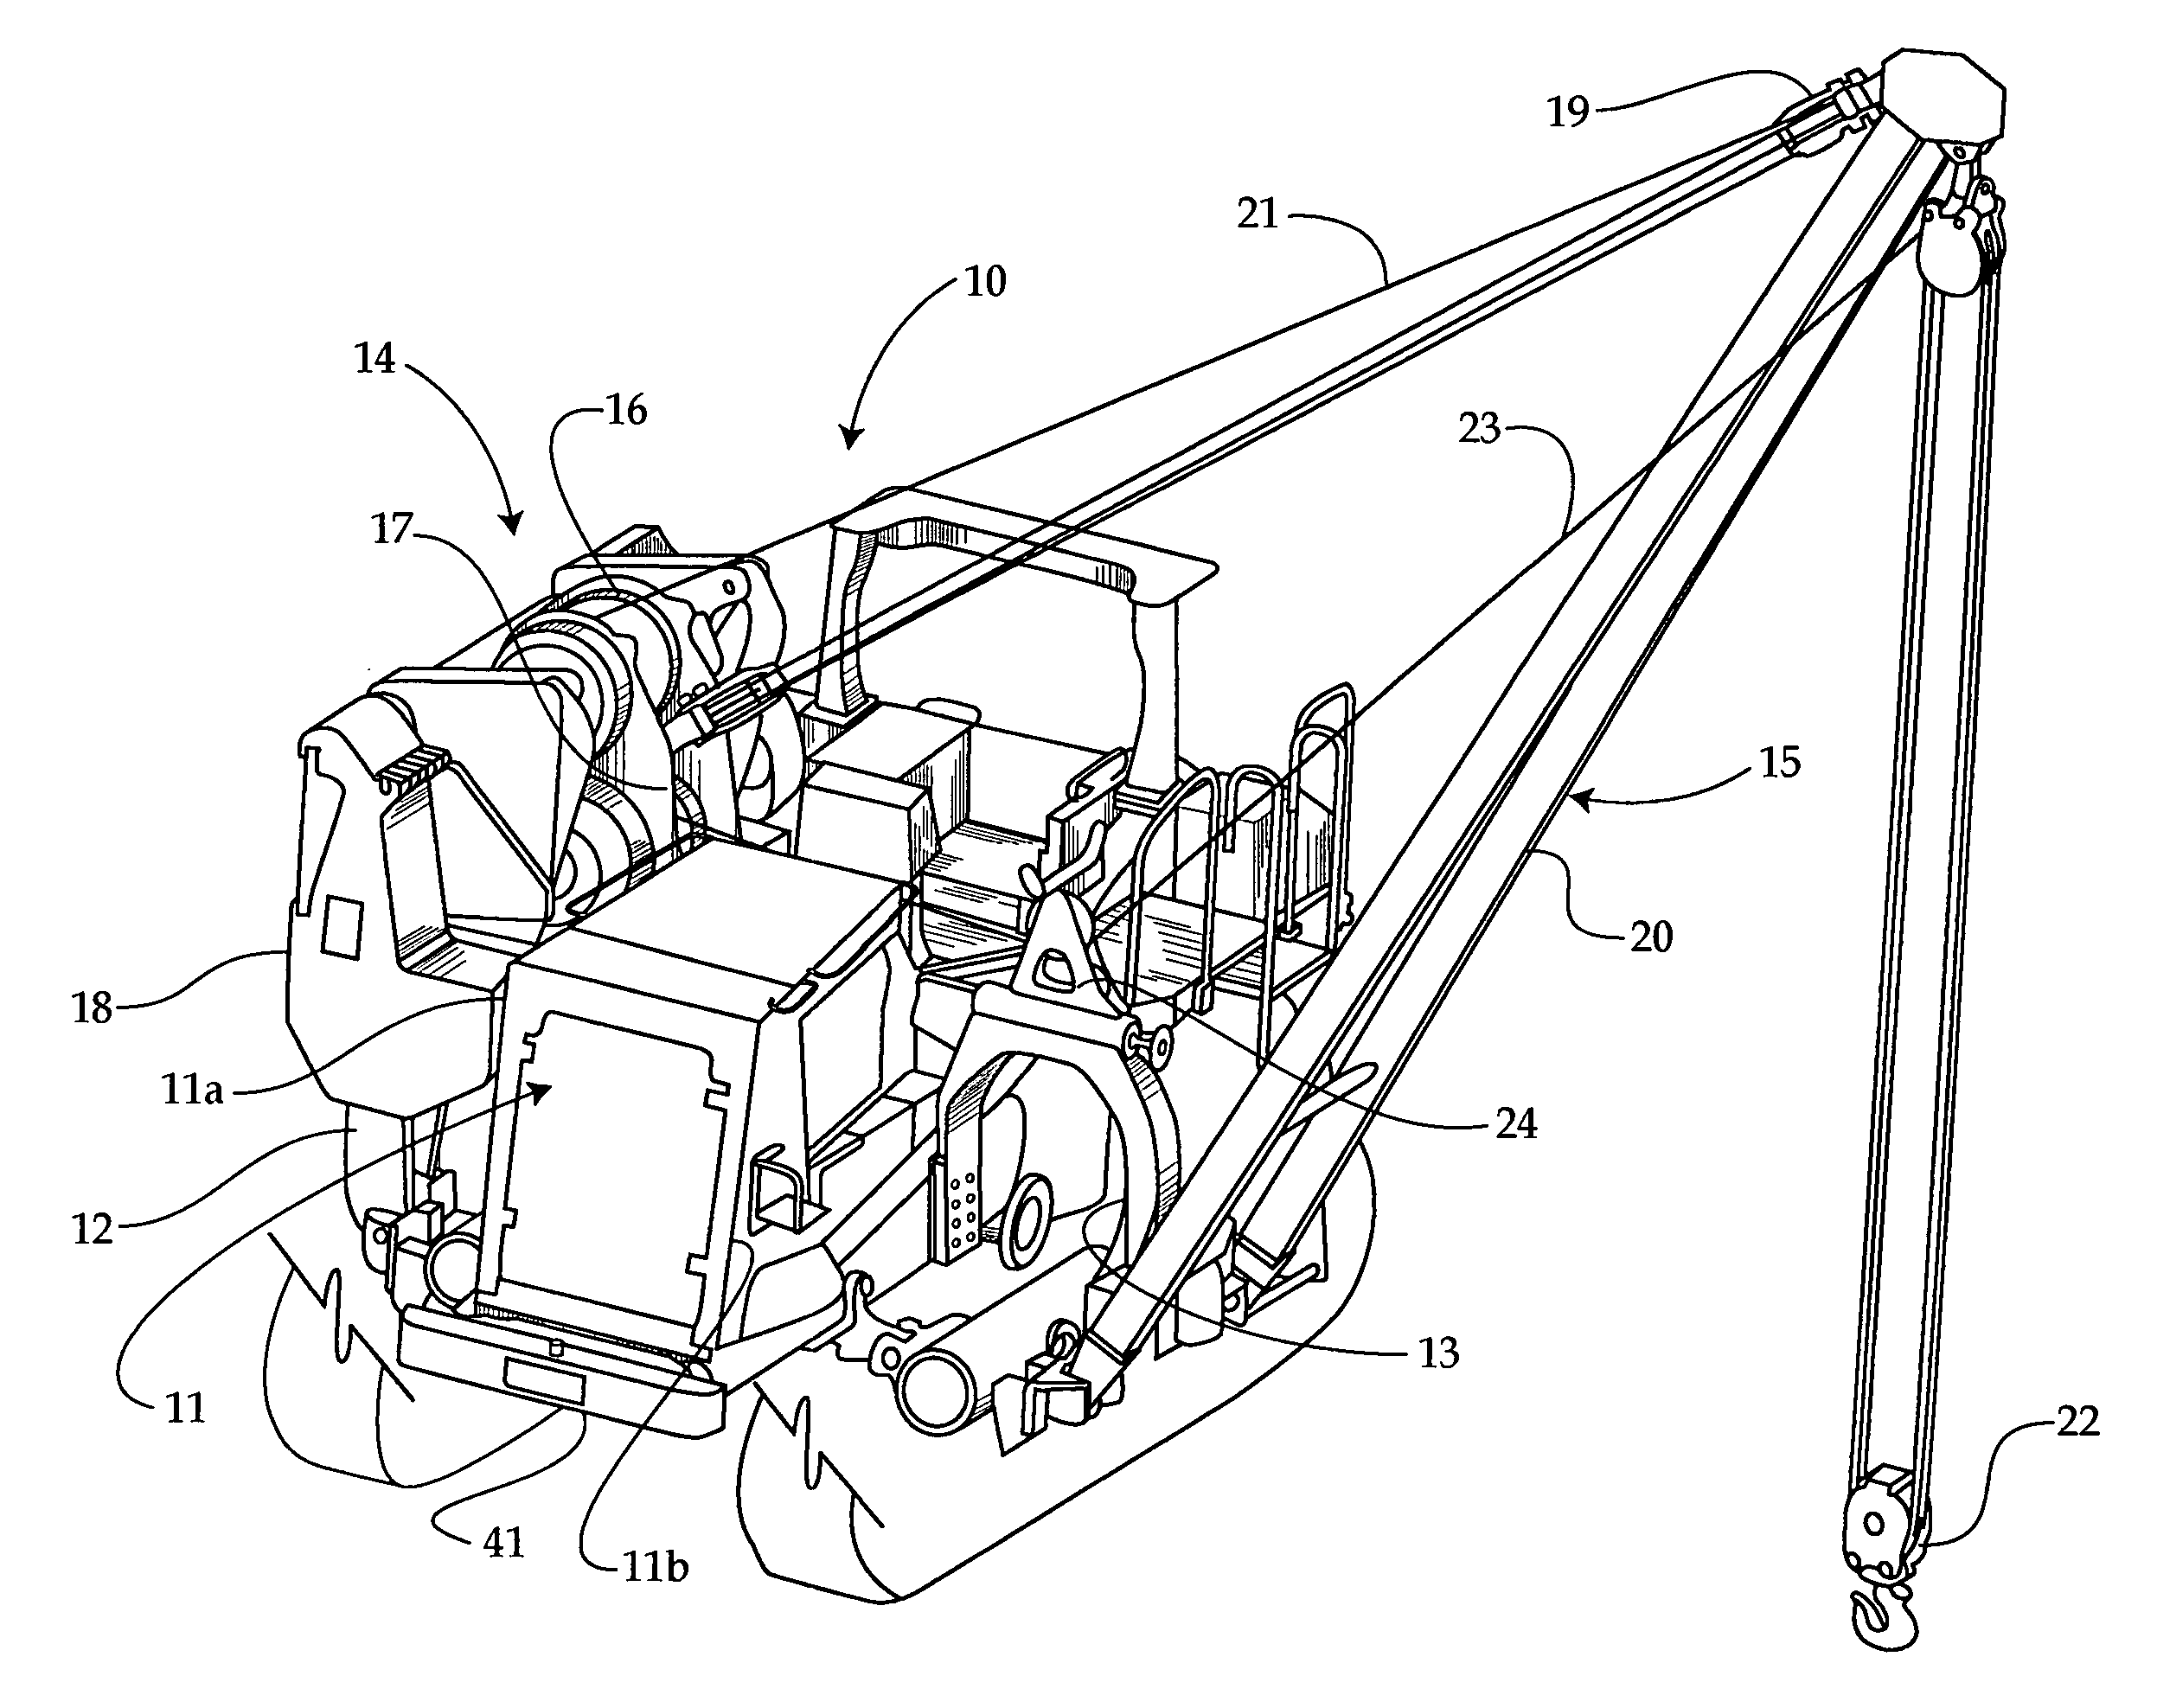 Pipelayer subframe and work machine with same